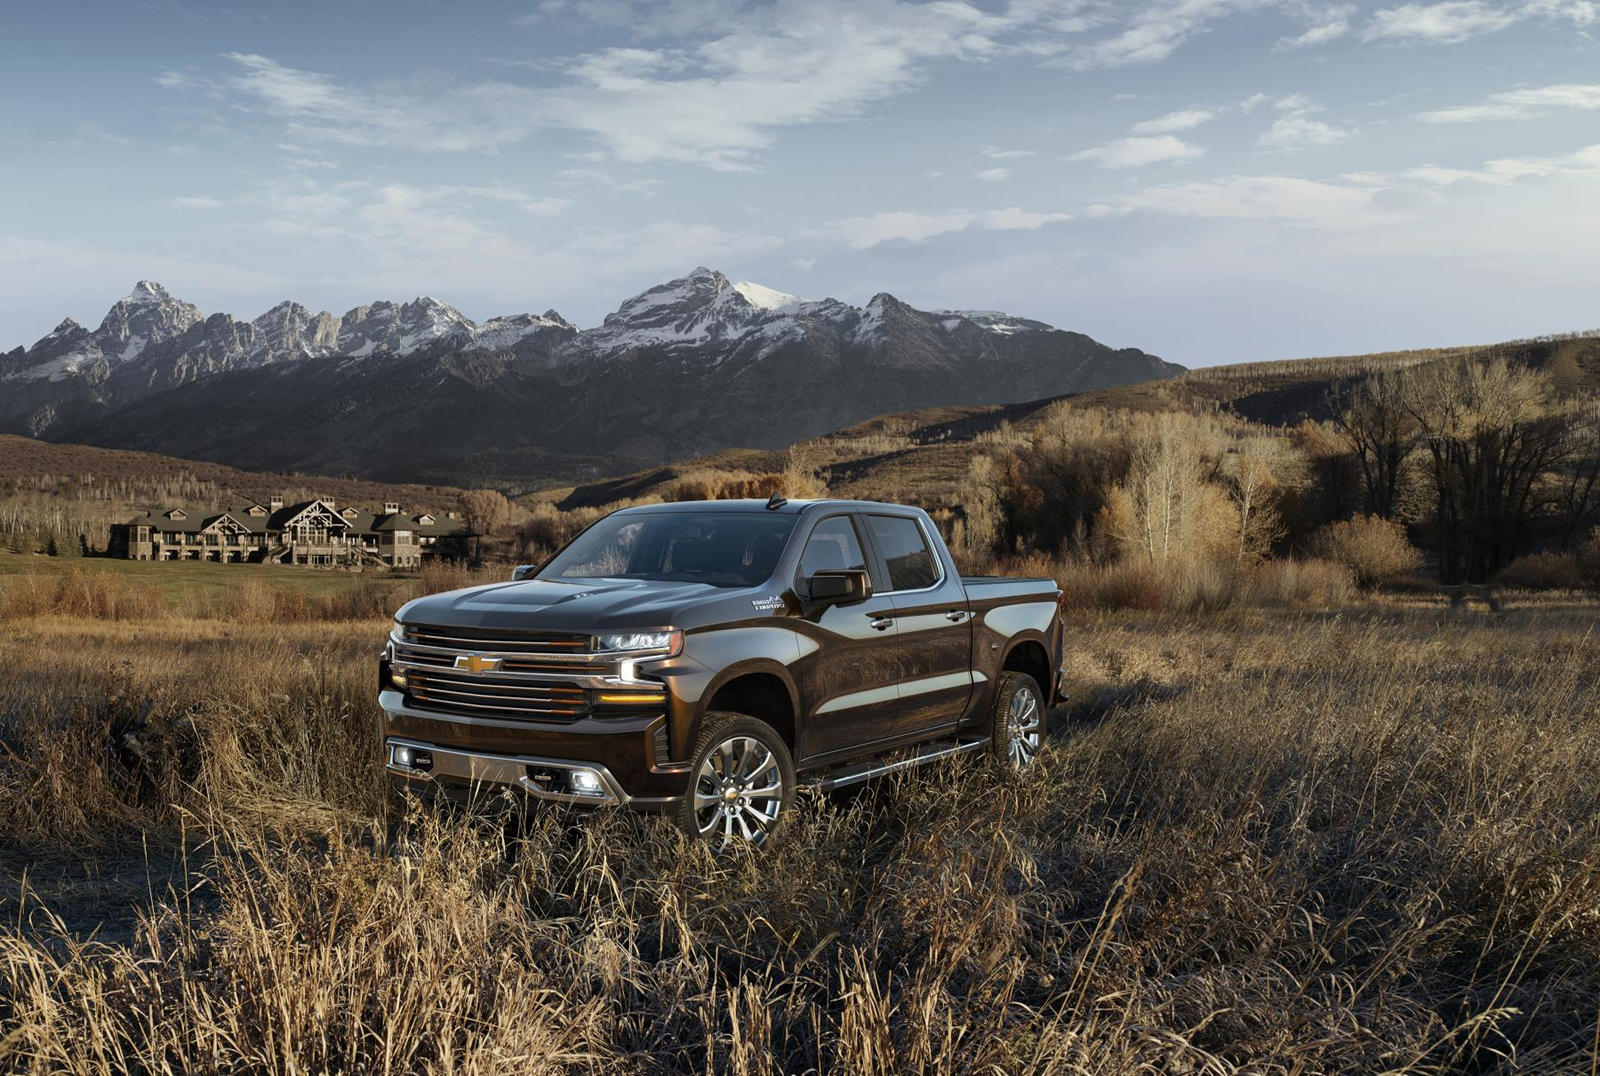 chevrolet-is-offering-some-amazing-silverado-discounts-this-month-carbuzz